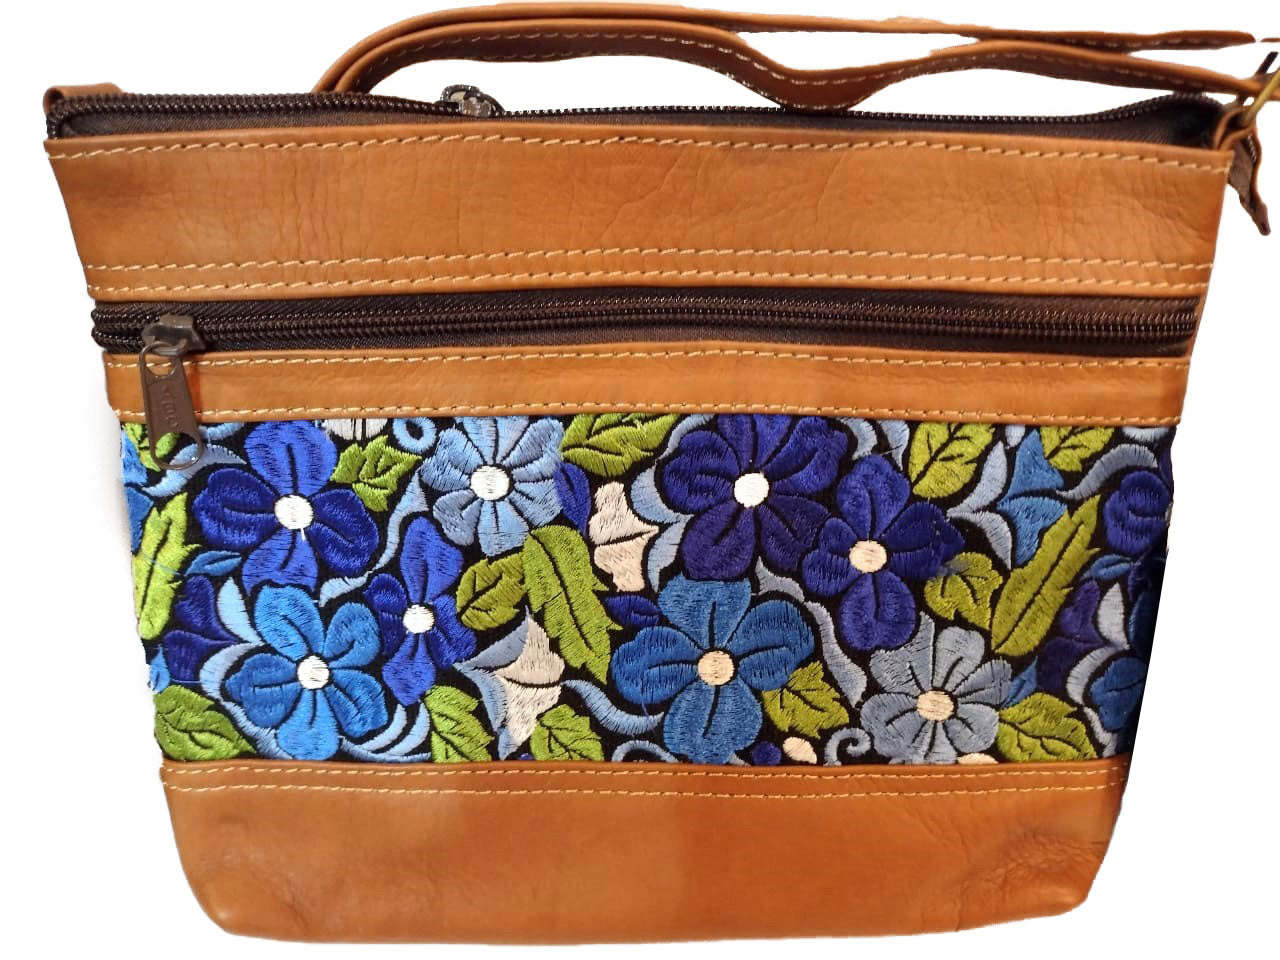 Buy Kate Spade Kourtney Leather Floral Applique Crossbody Purse at Amazon.in